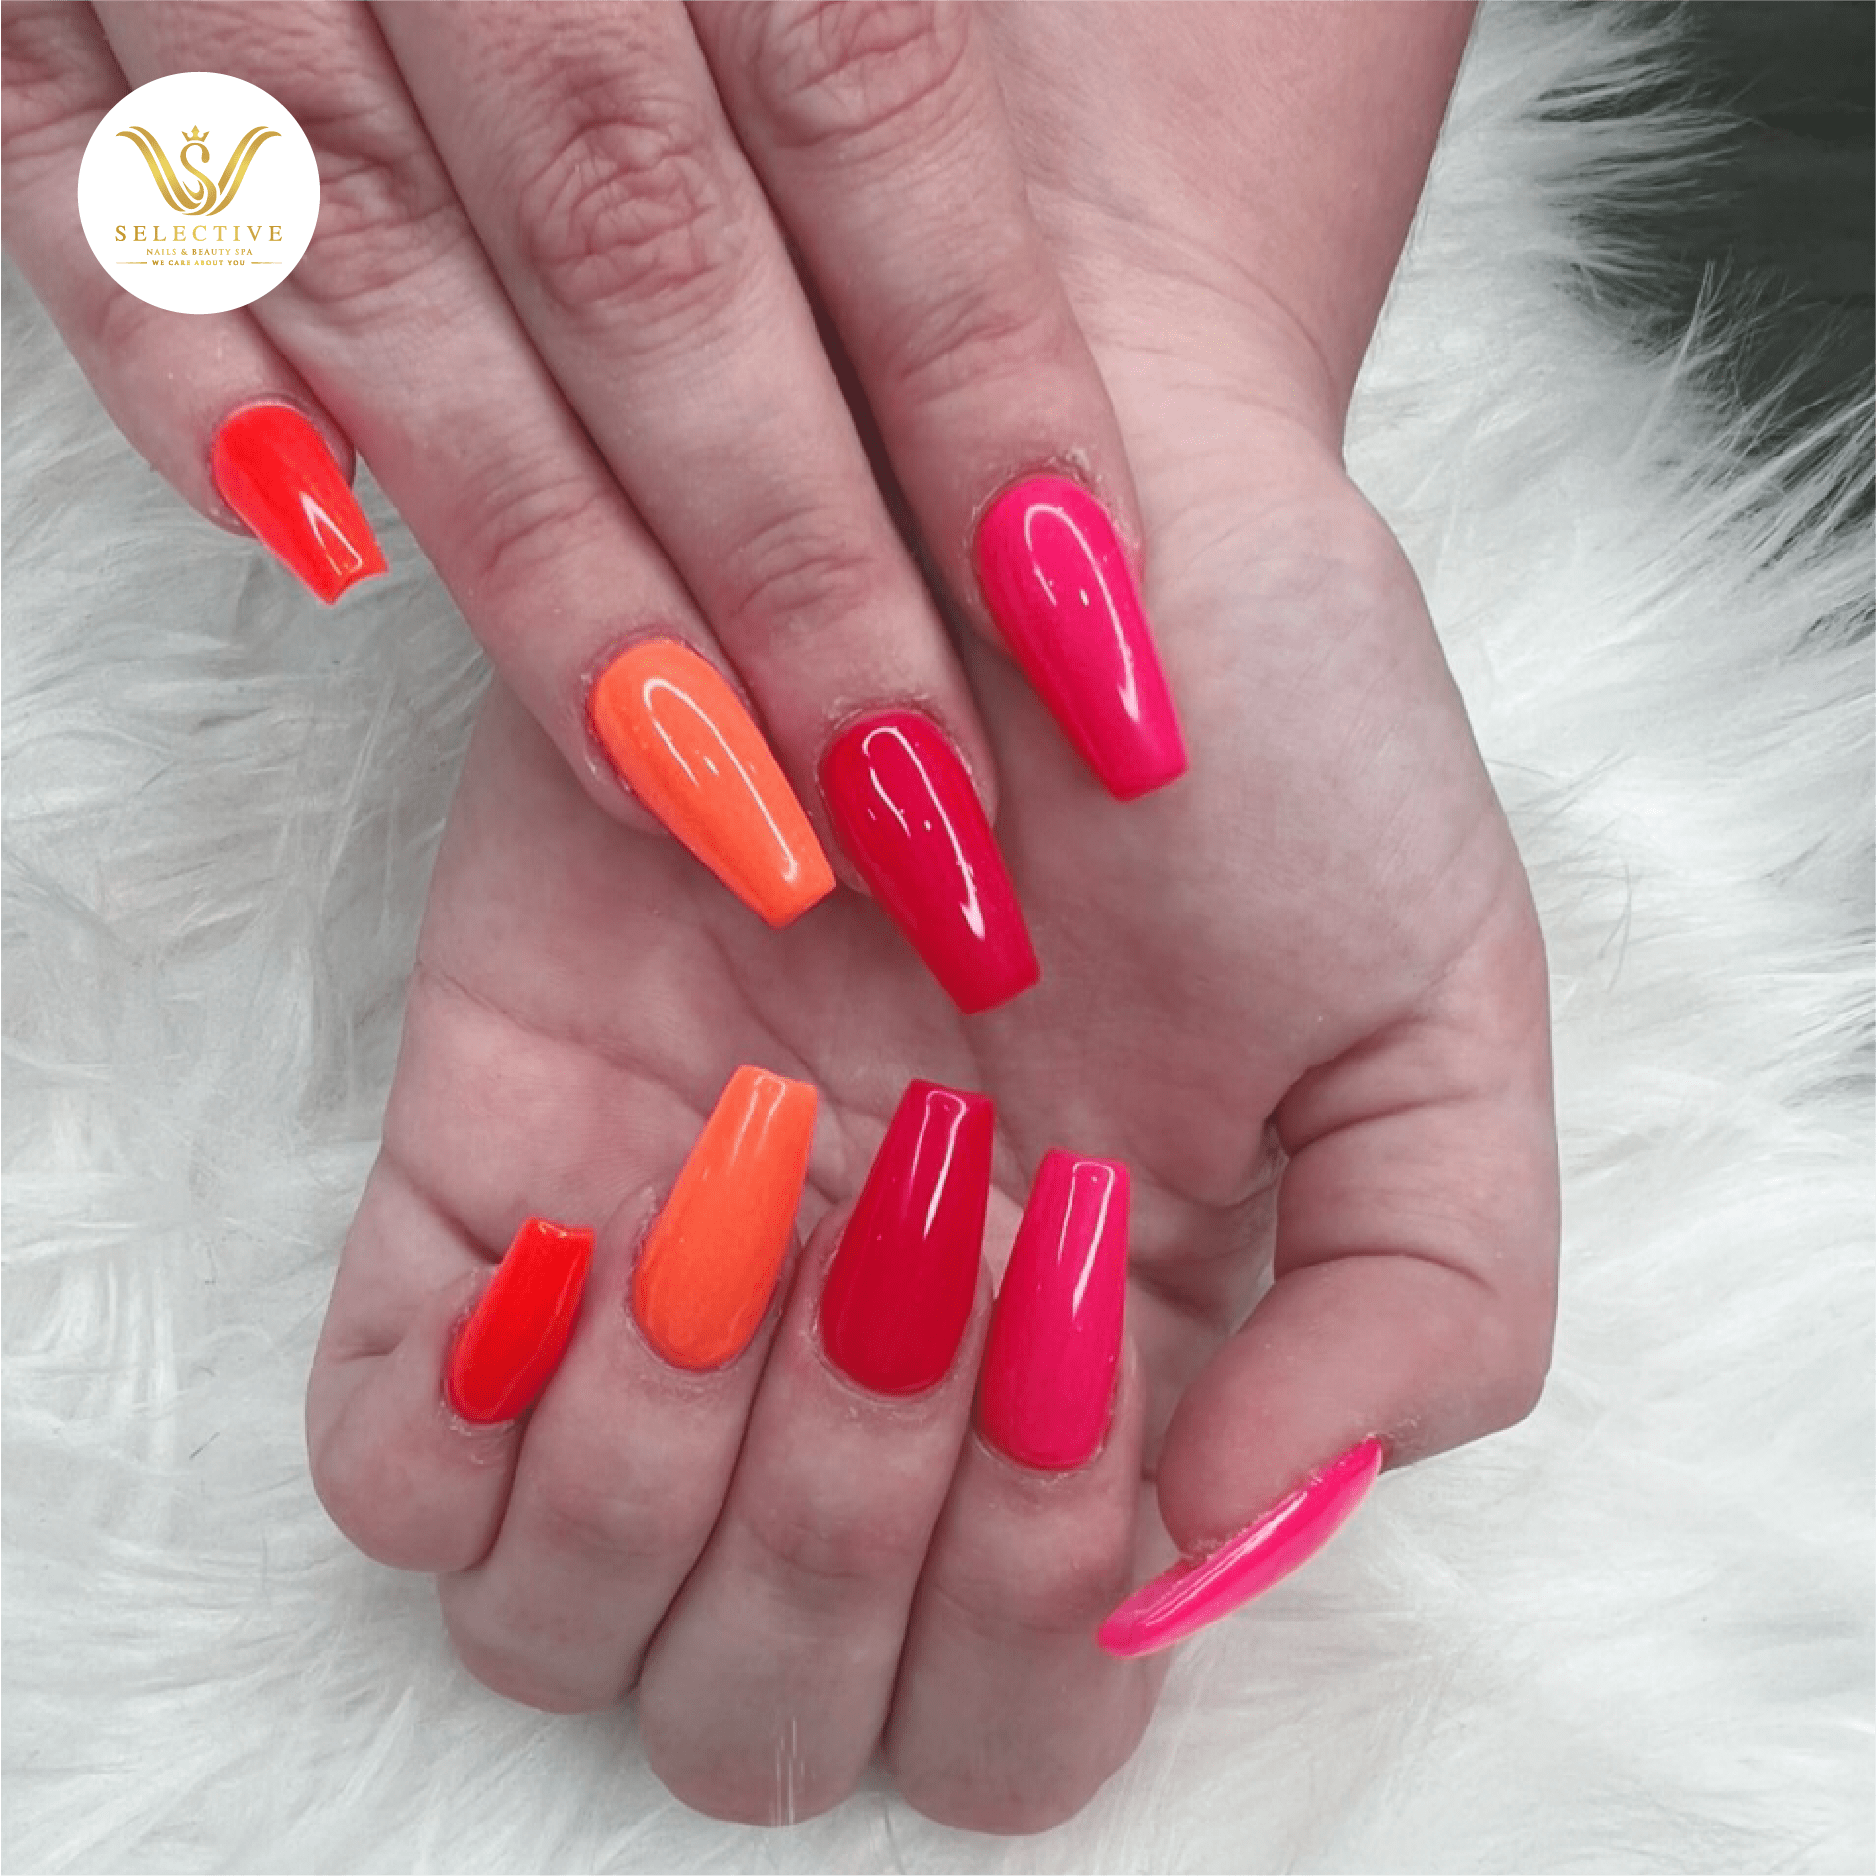 Manicure trends with colorful nails